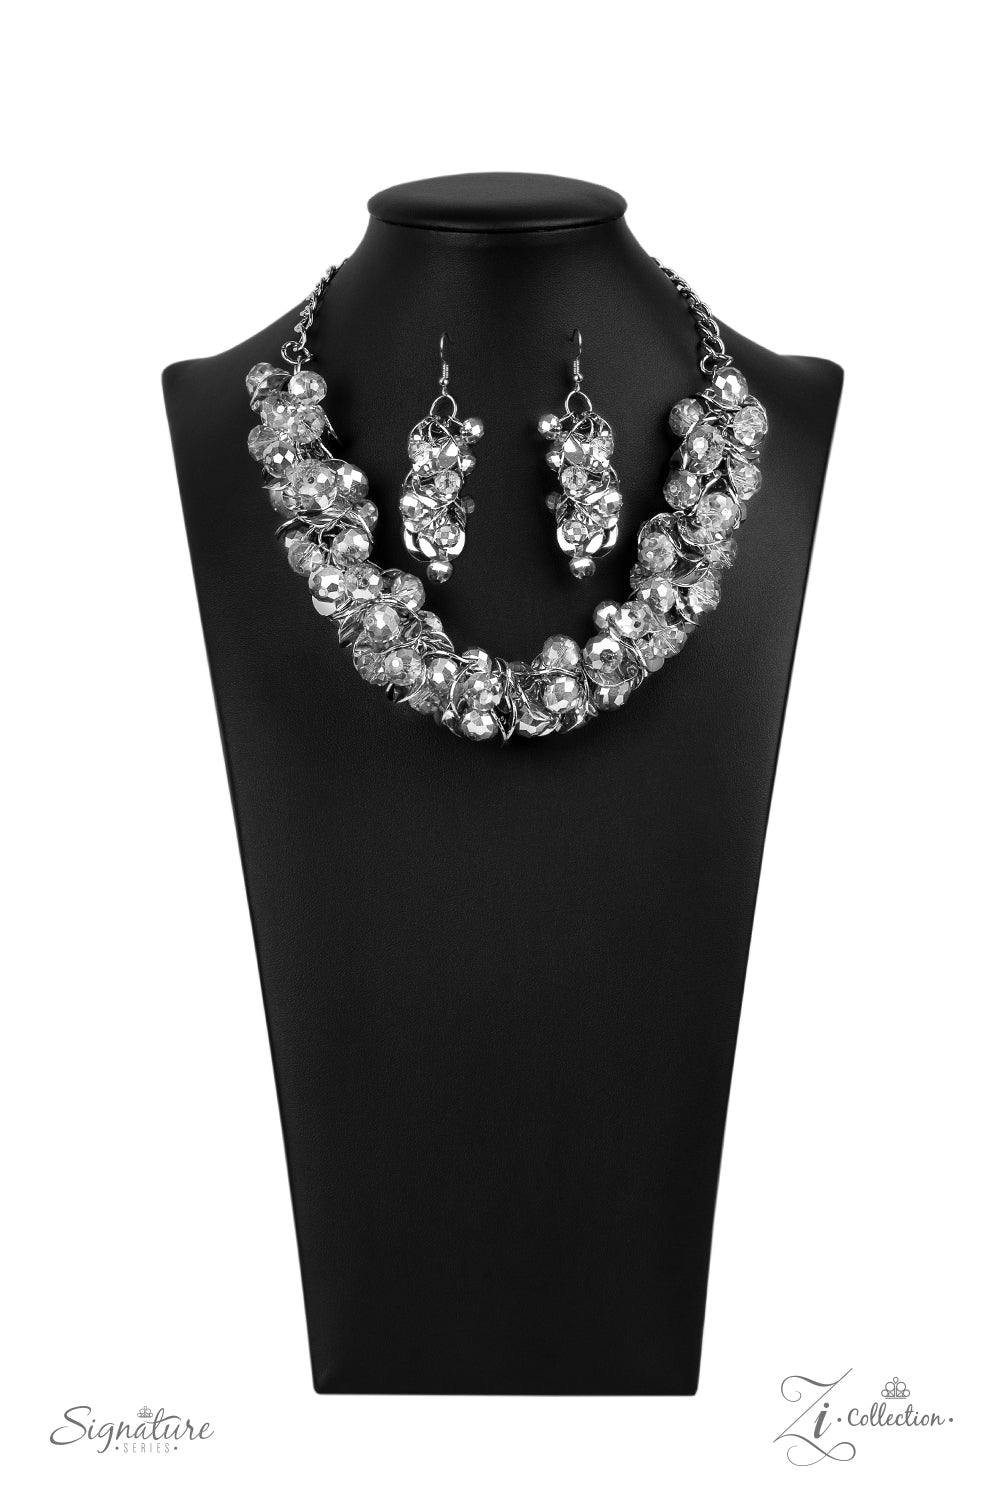 THE HAYDEE - SILVER CRYSTAL BEADS CLUSTER 2020 ZI NECKLACE